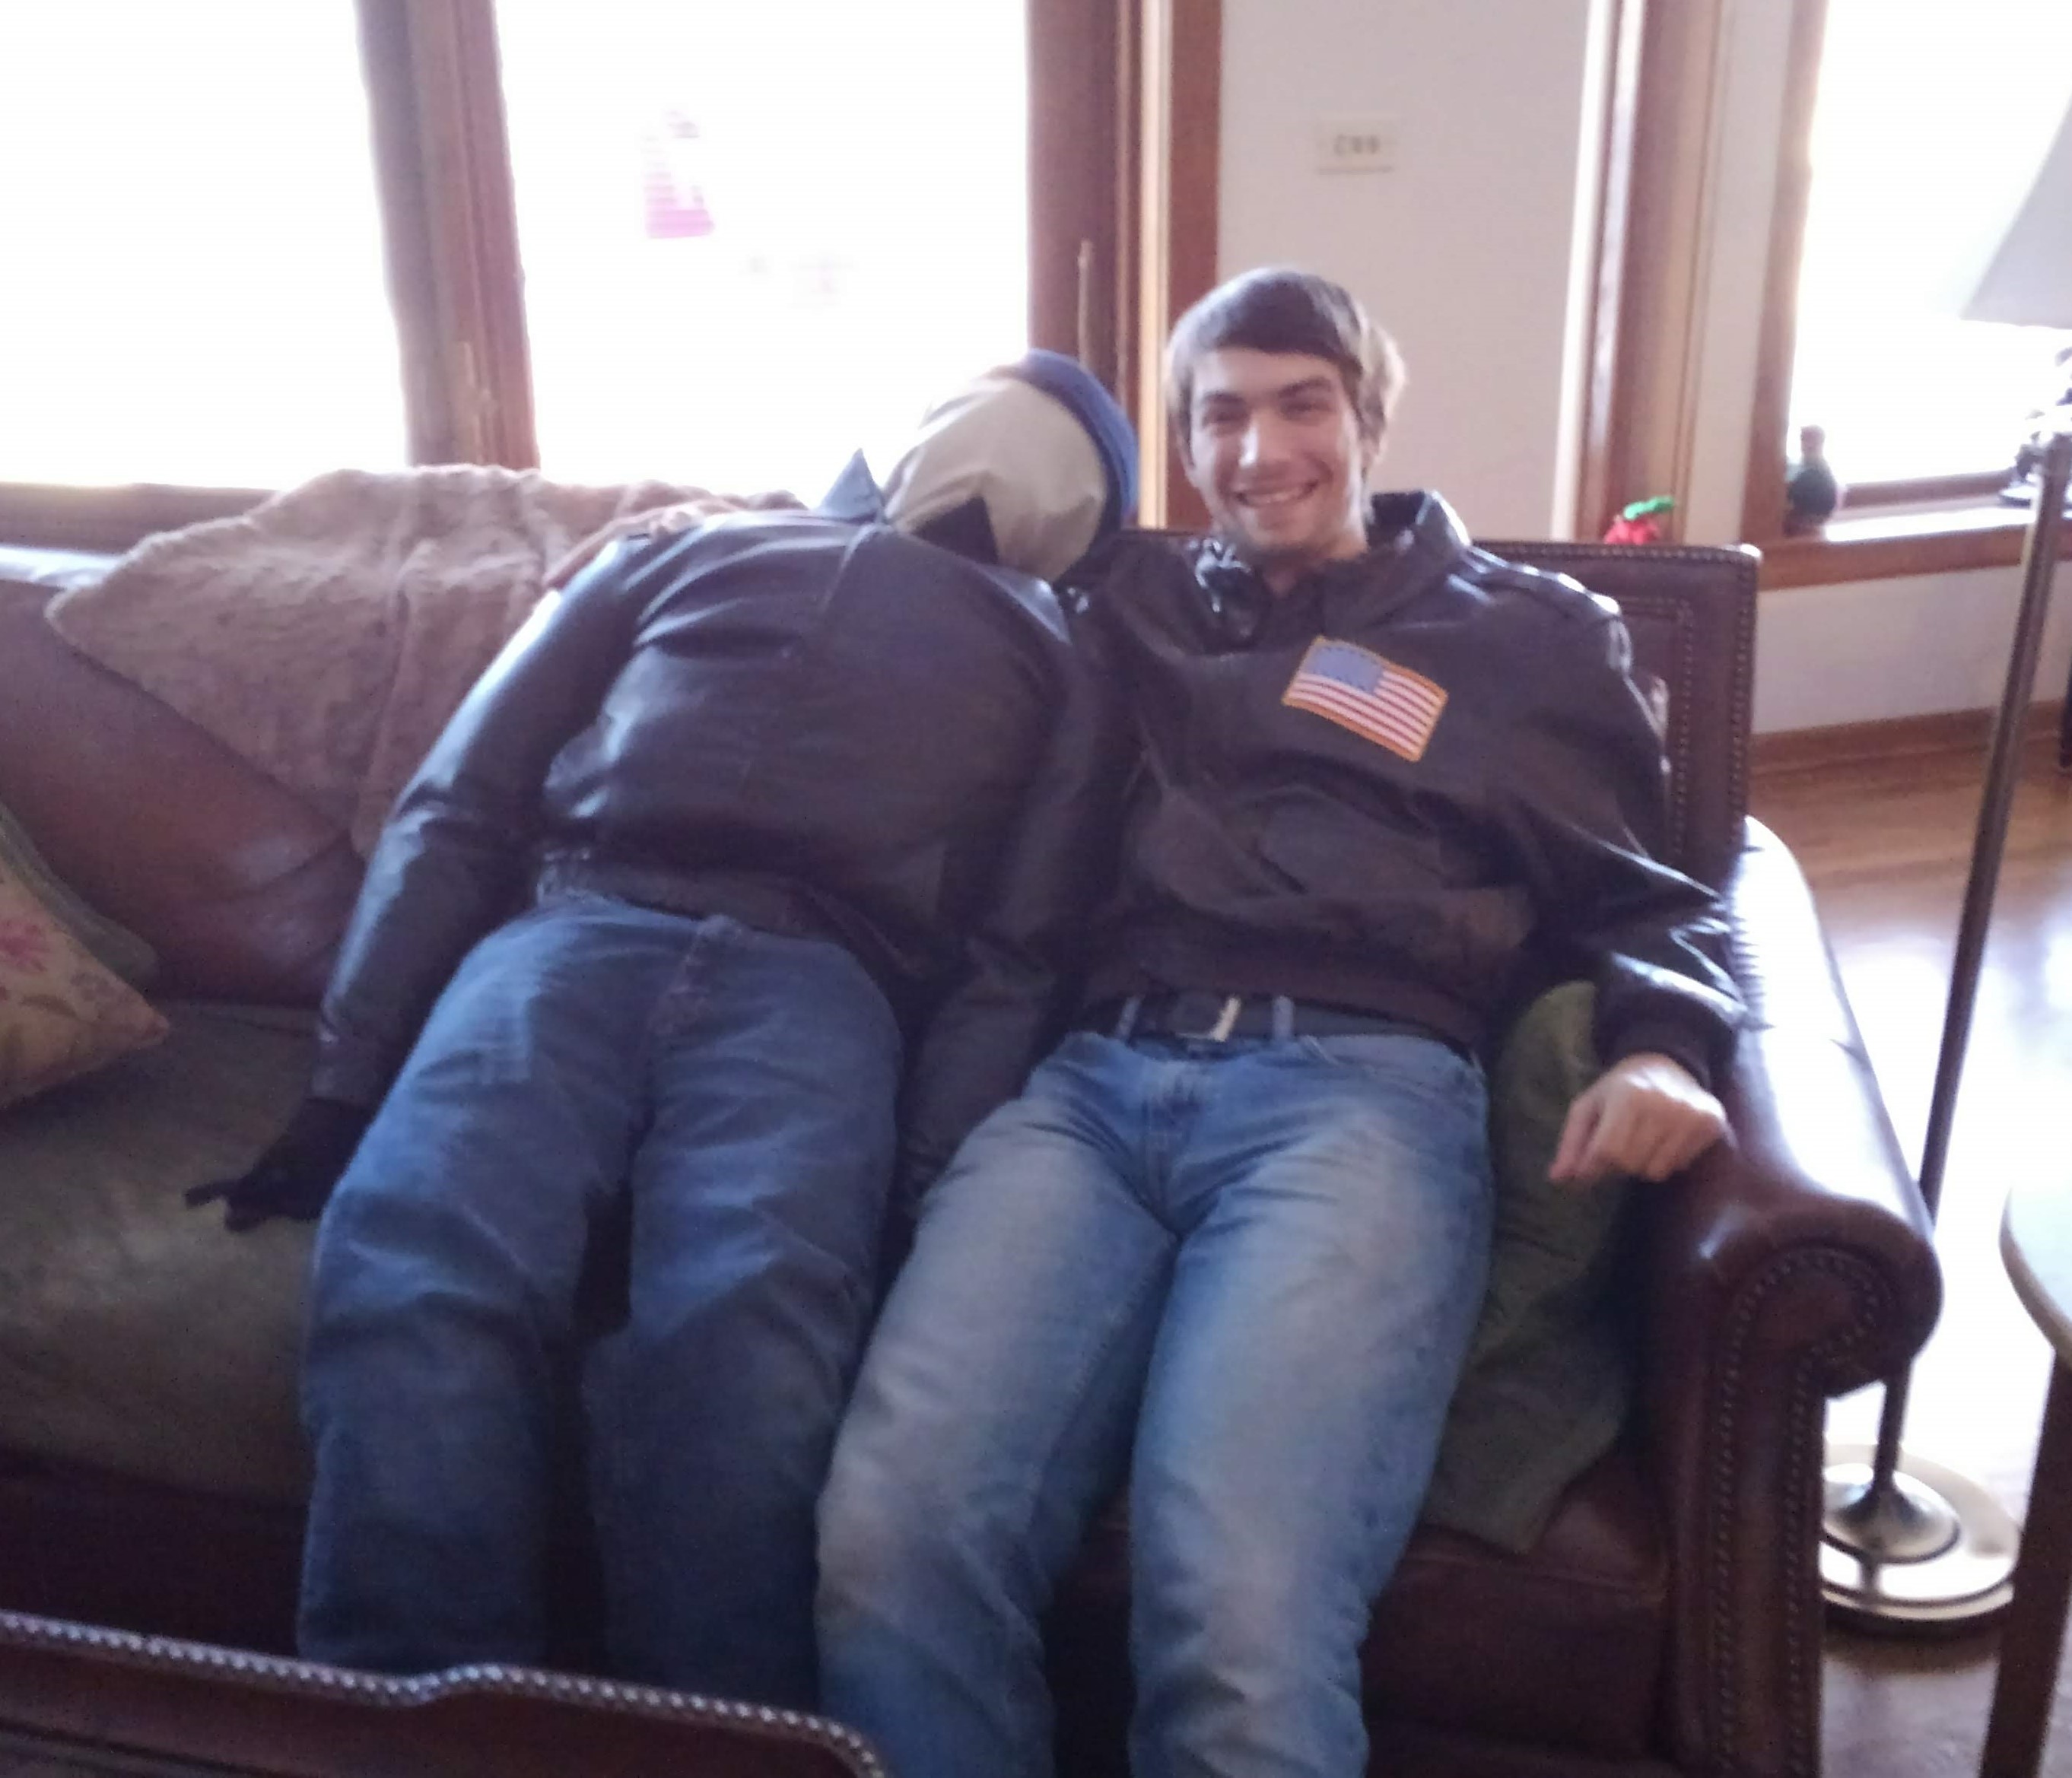 a man and a dummy sitting next to each other on a couch, dressed in similar clothing